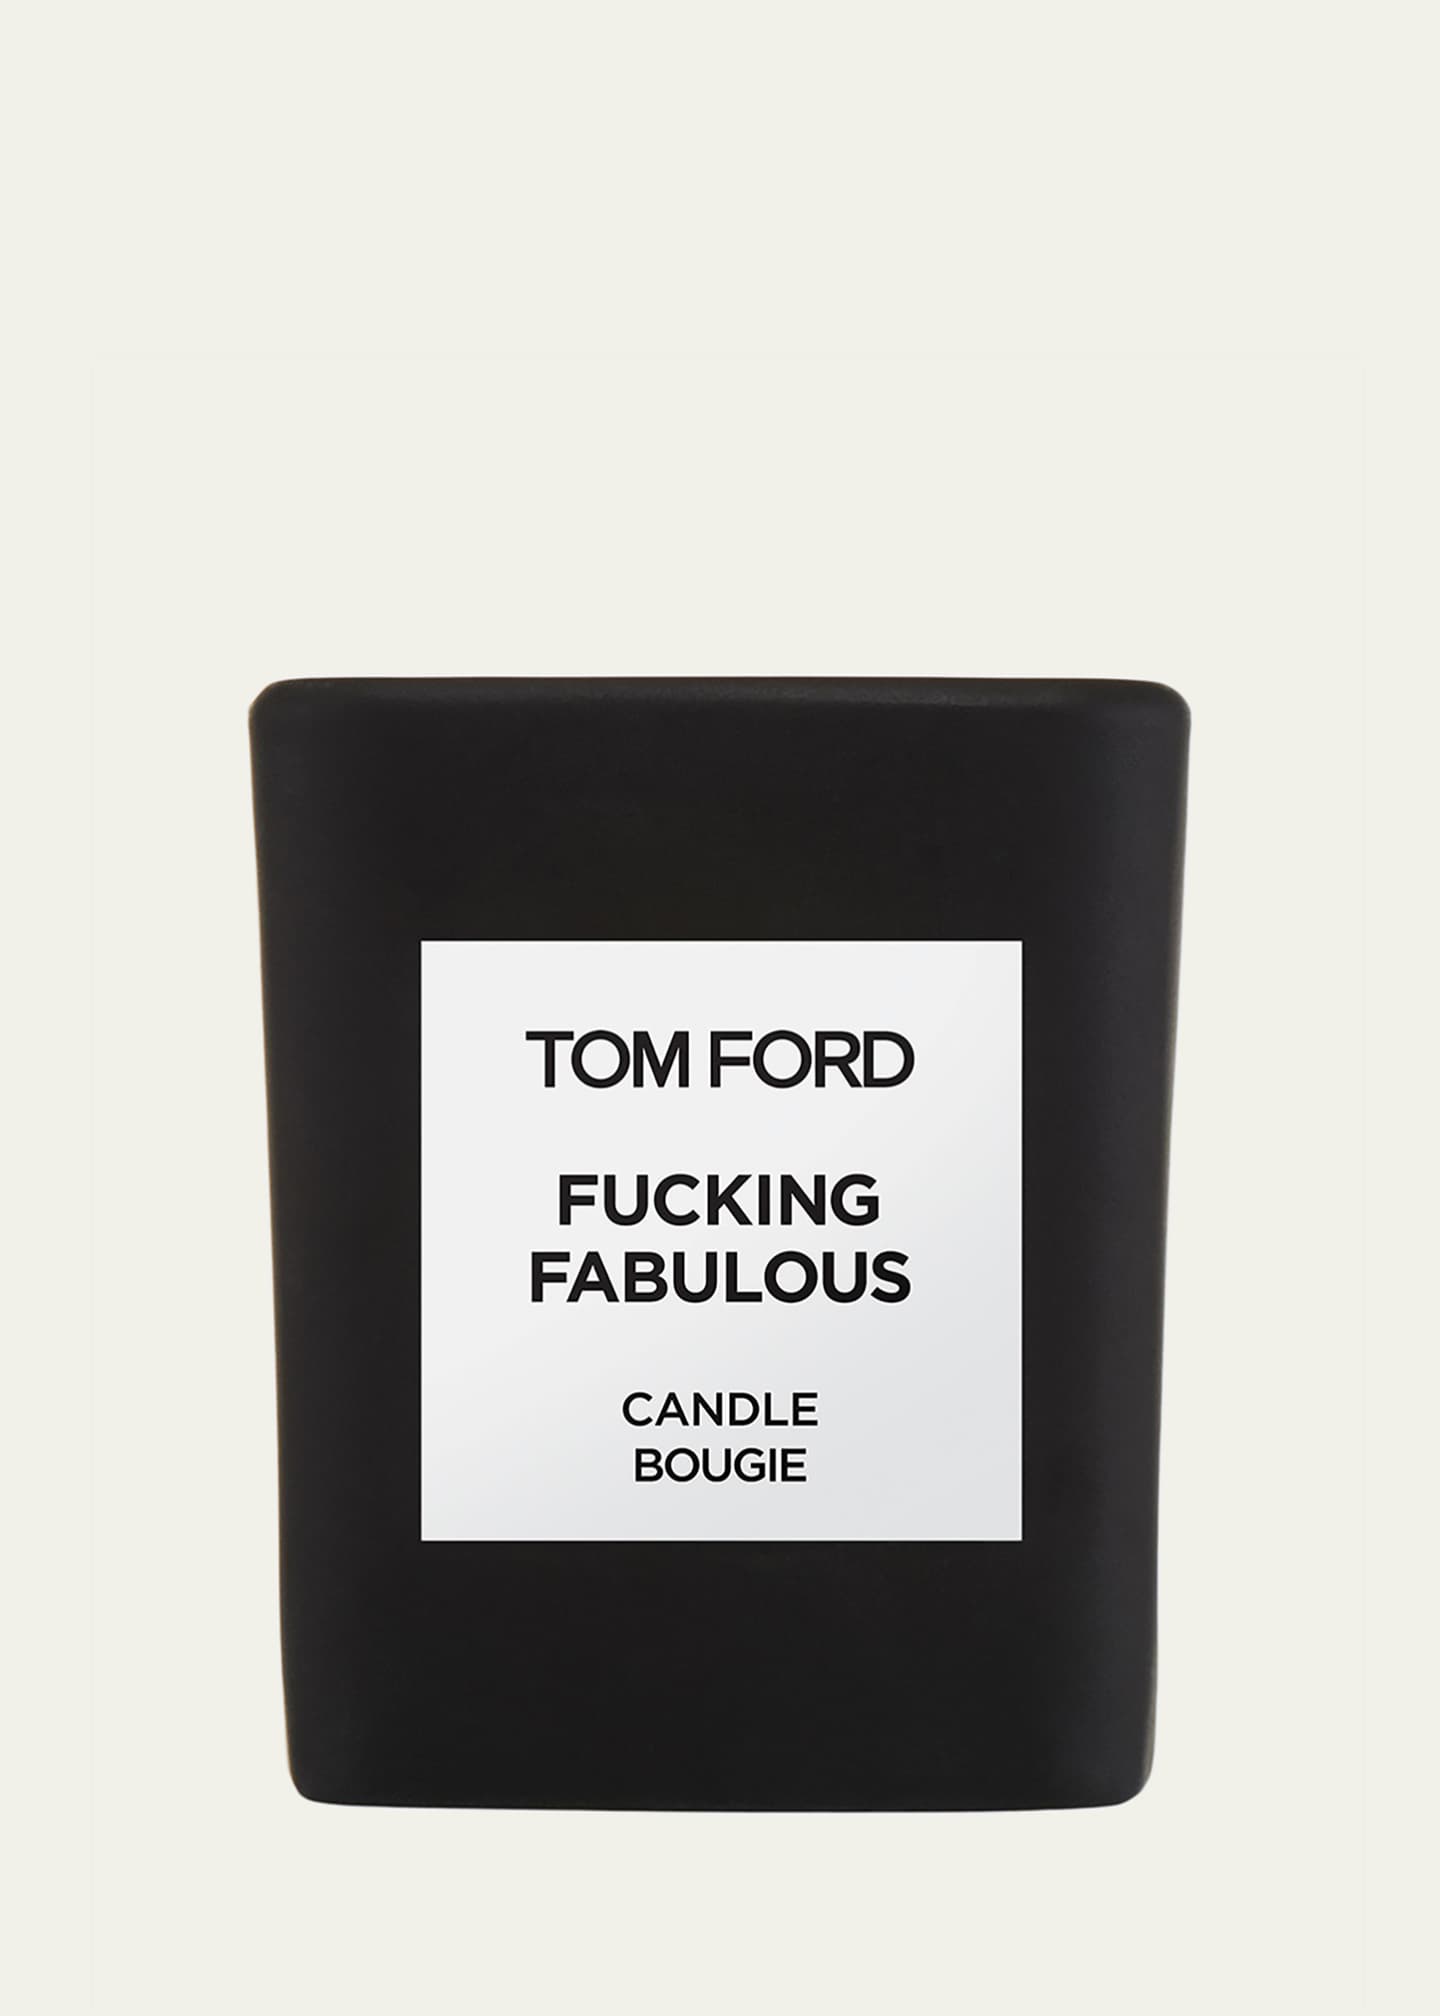 TOM FORD Fabulous Home Candle Image 1 of 2